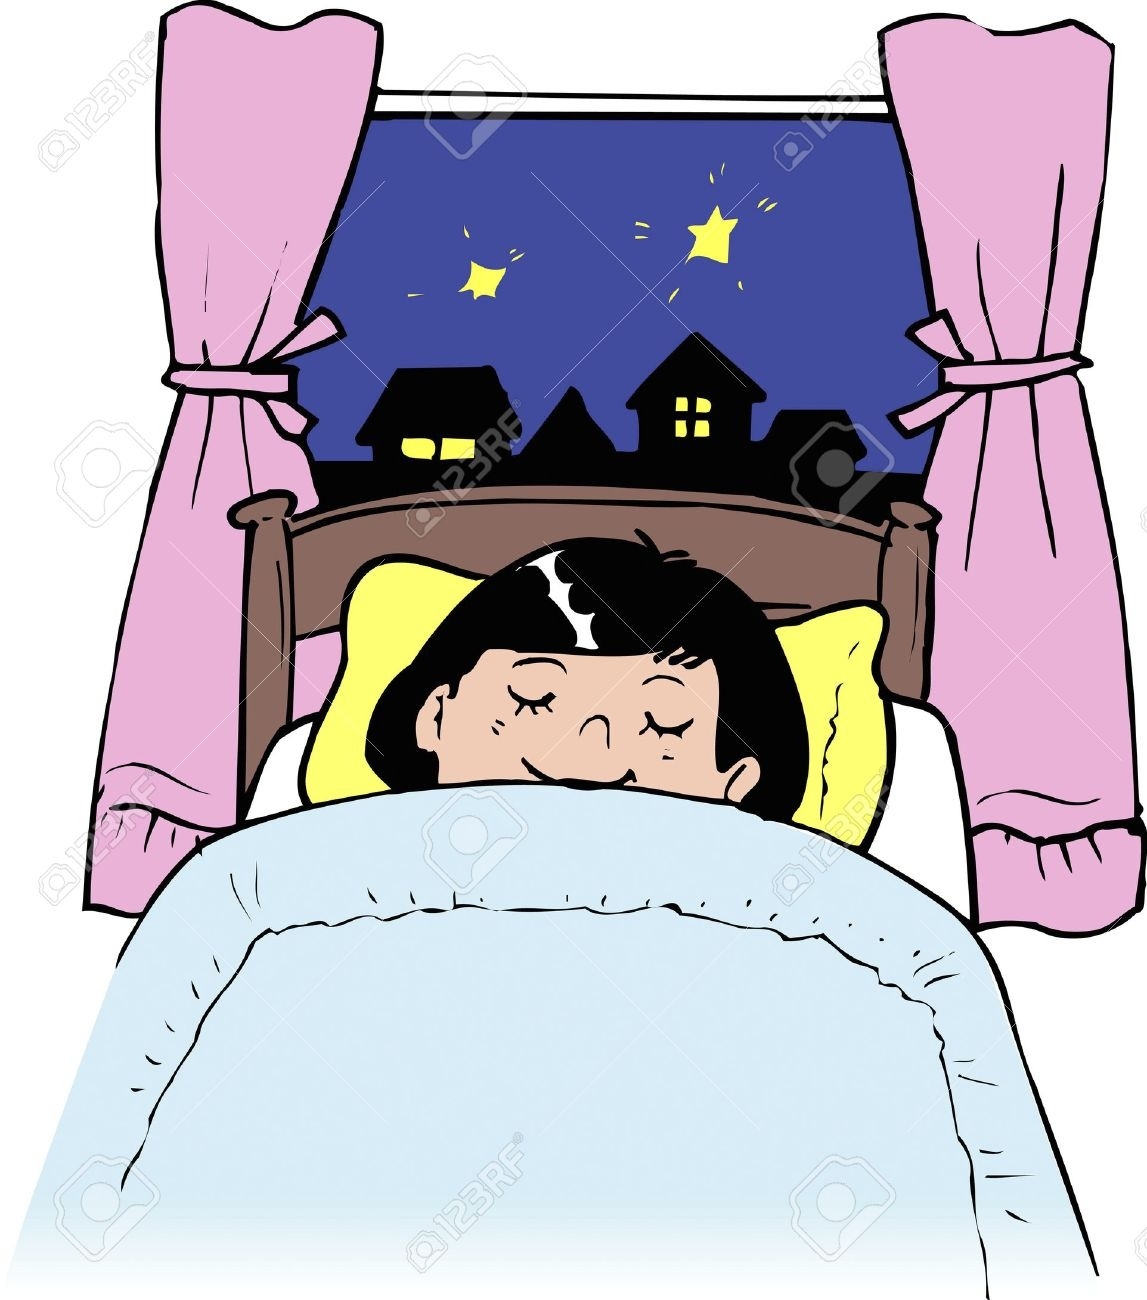 261 Going To Bed free clipart.